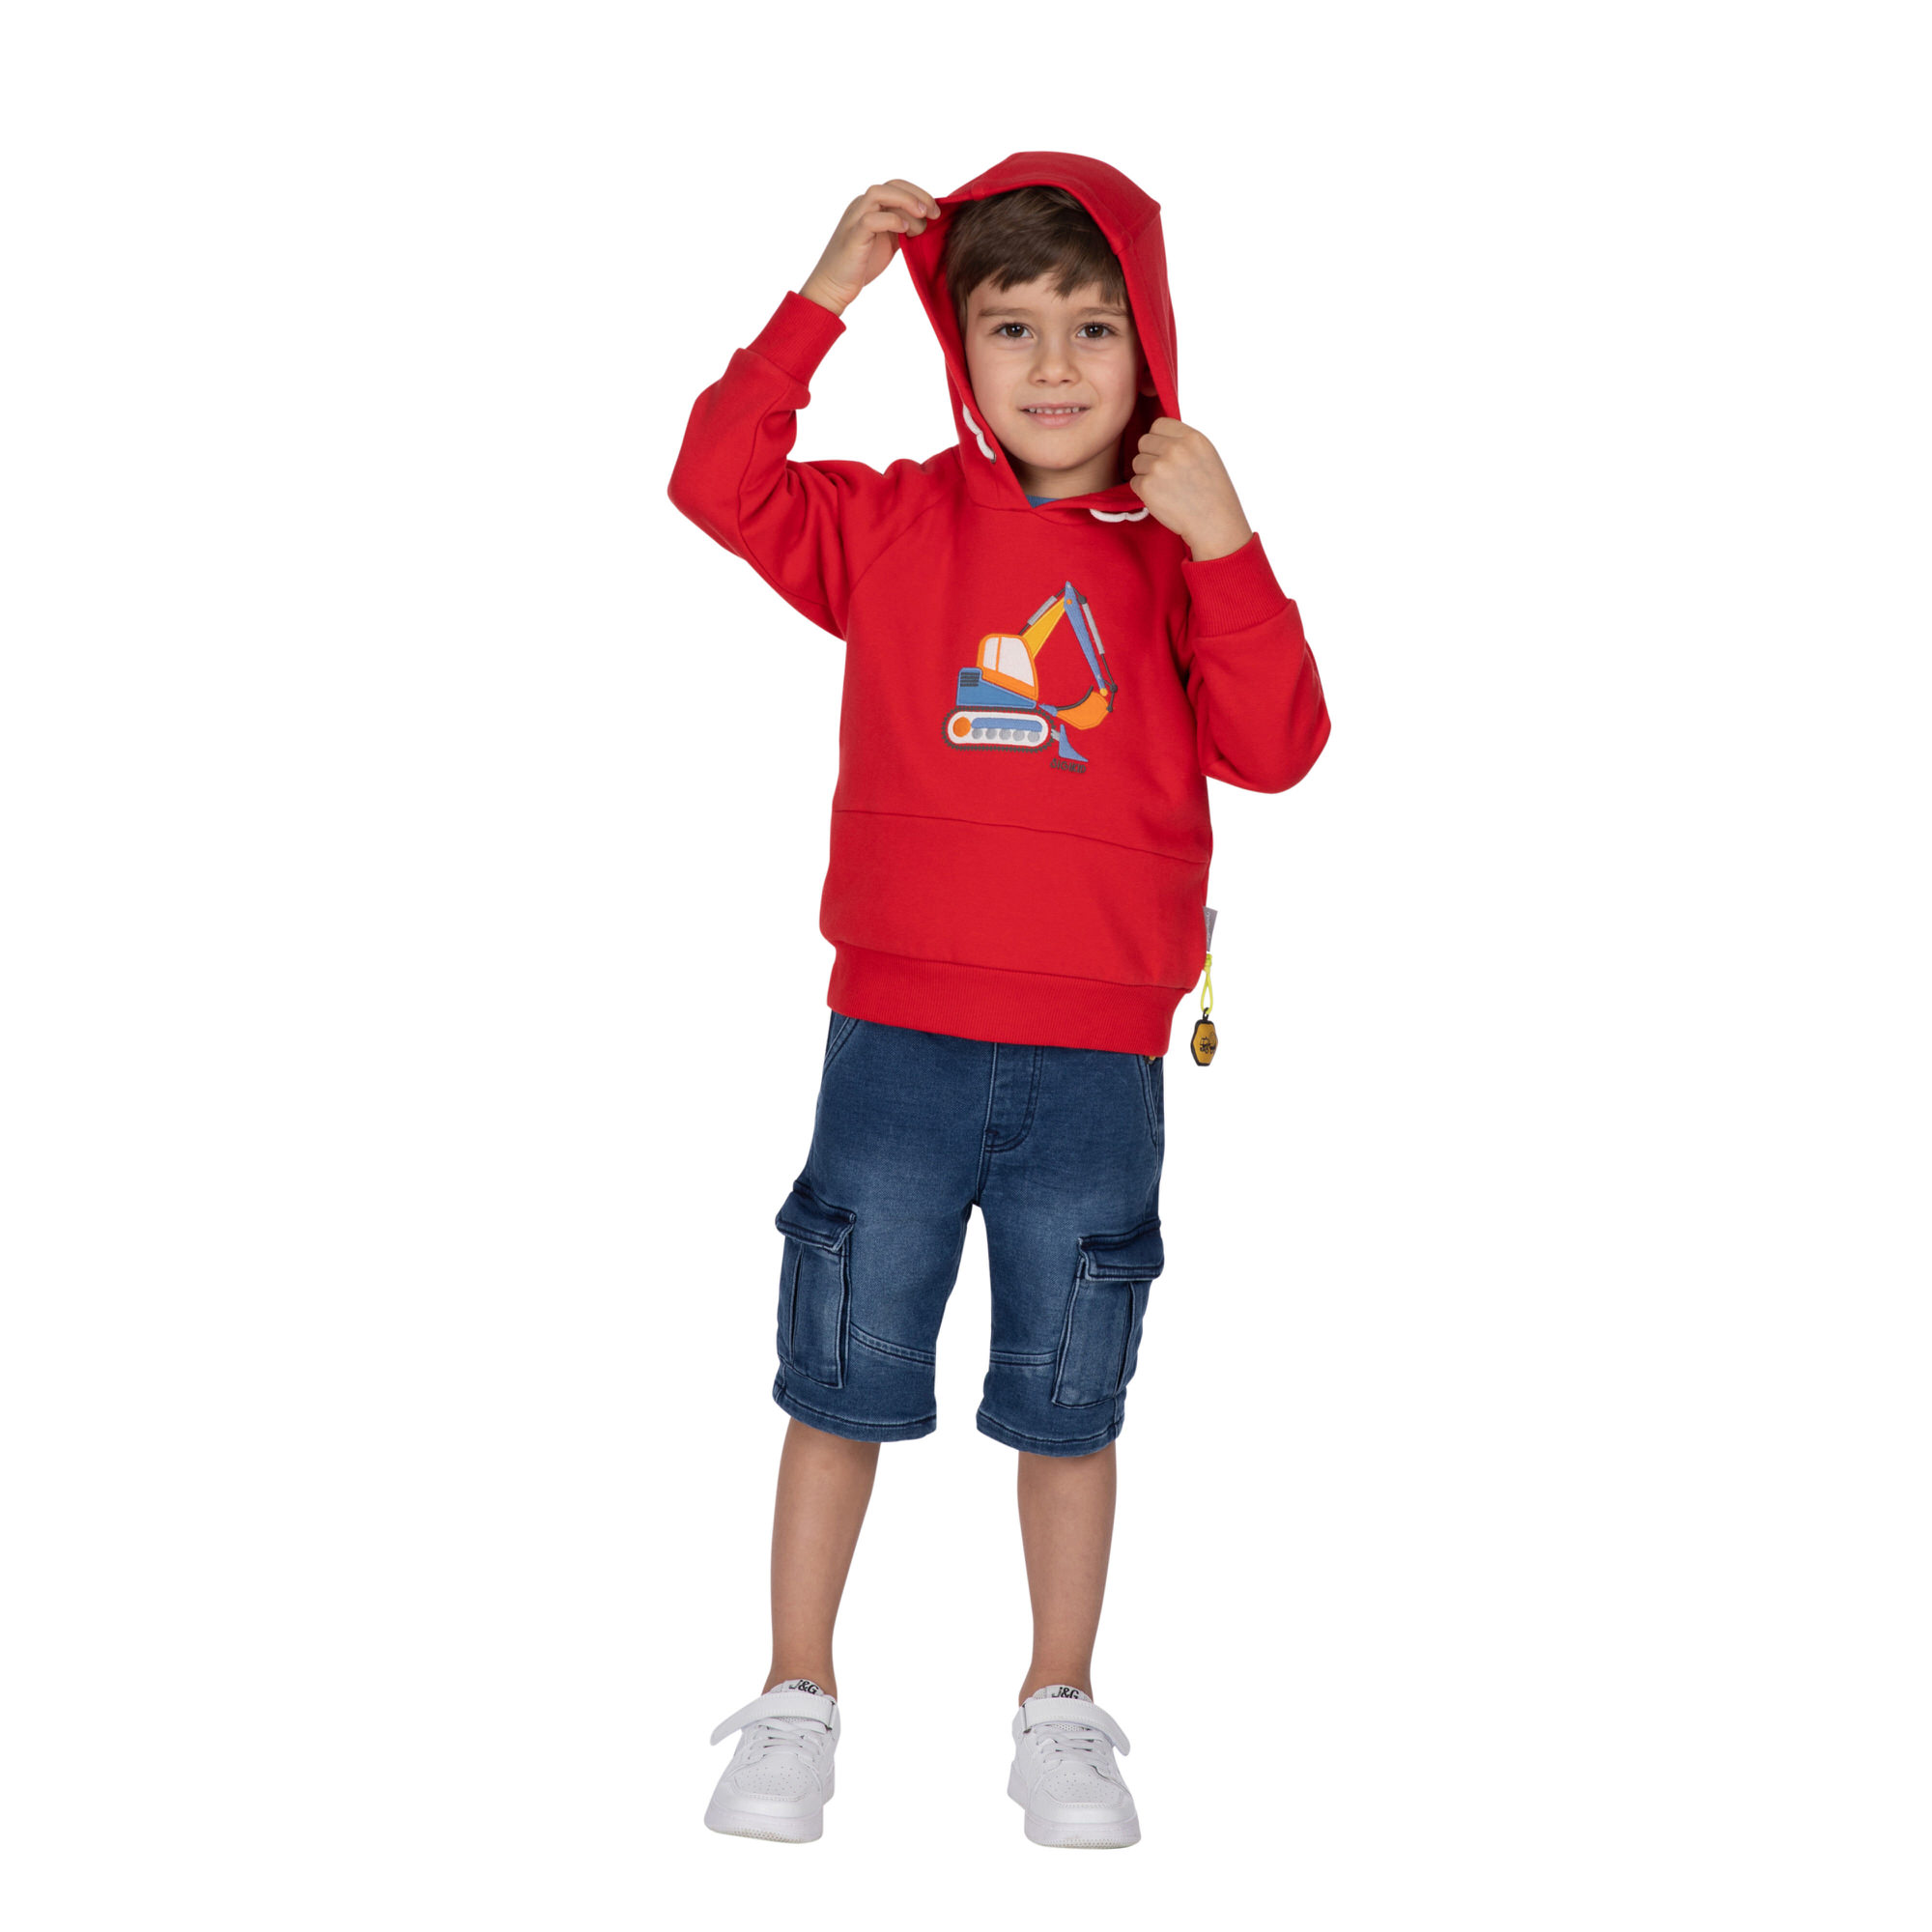 Stretchy jeans bermuda shorts for boys